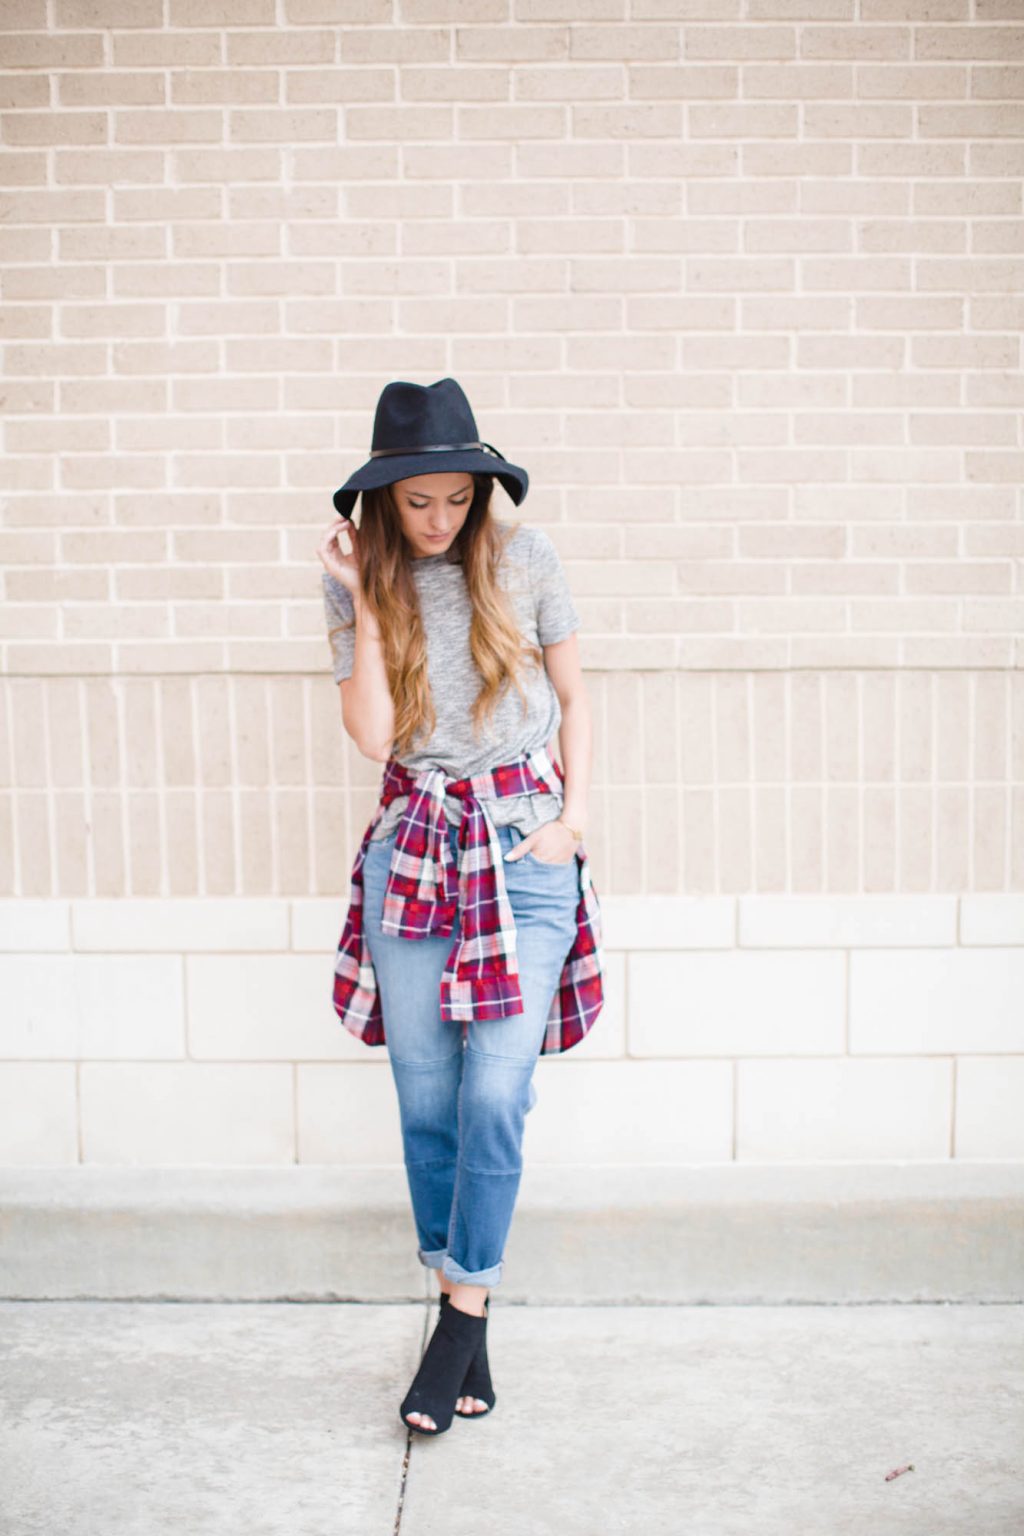 old navy style, patchwork denim, plaid flannel, Old Navy Boyfriend Plaid Flannel Shirt in Purple Plaid, Old Navy Women's Boyfriend Skinny Ankle jeans ABERDEEN, Old Navy Women's Wool Felt Fedora in Black, summer to fall transition outfit ideas, early fall outfit ideas, fall in the south, old navy patchwork denim